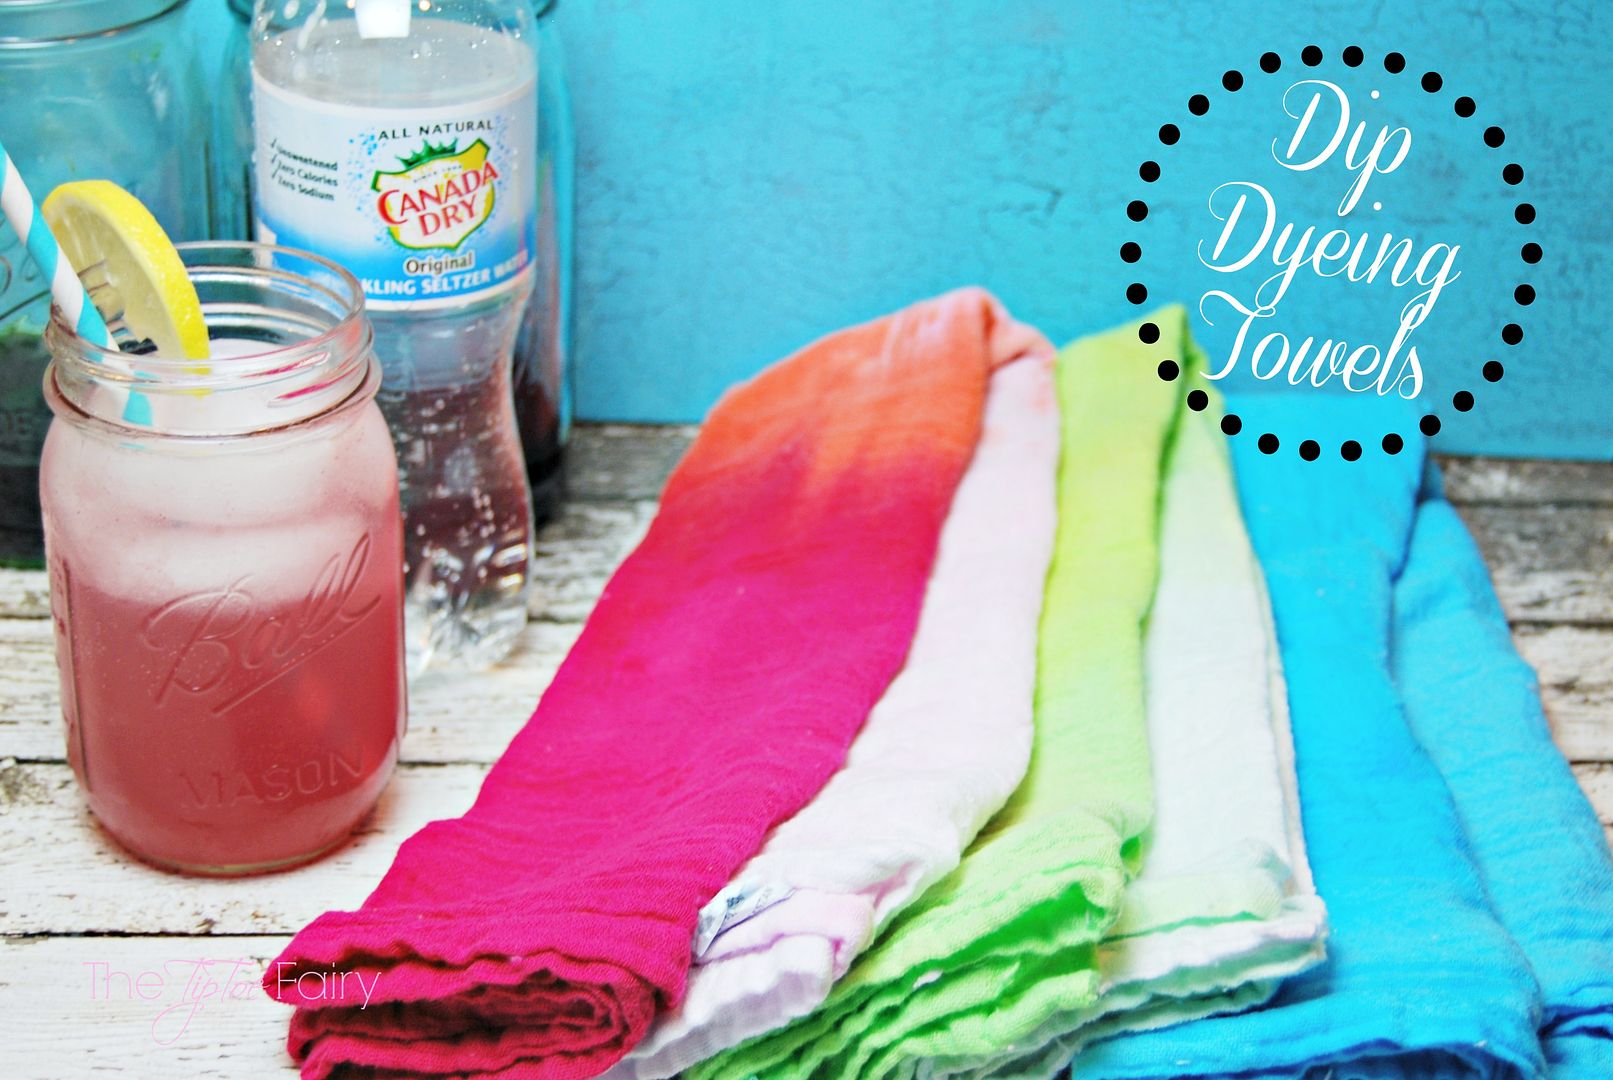 Dip Dyeing Towels Tutorial | The TipToe Fairy #AddSparkle  #shop #crafttutorial #dyetutorial